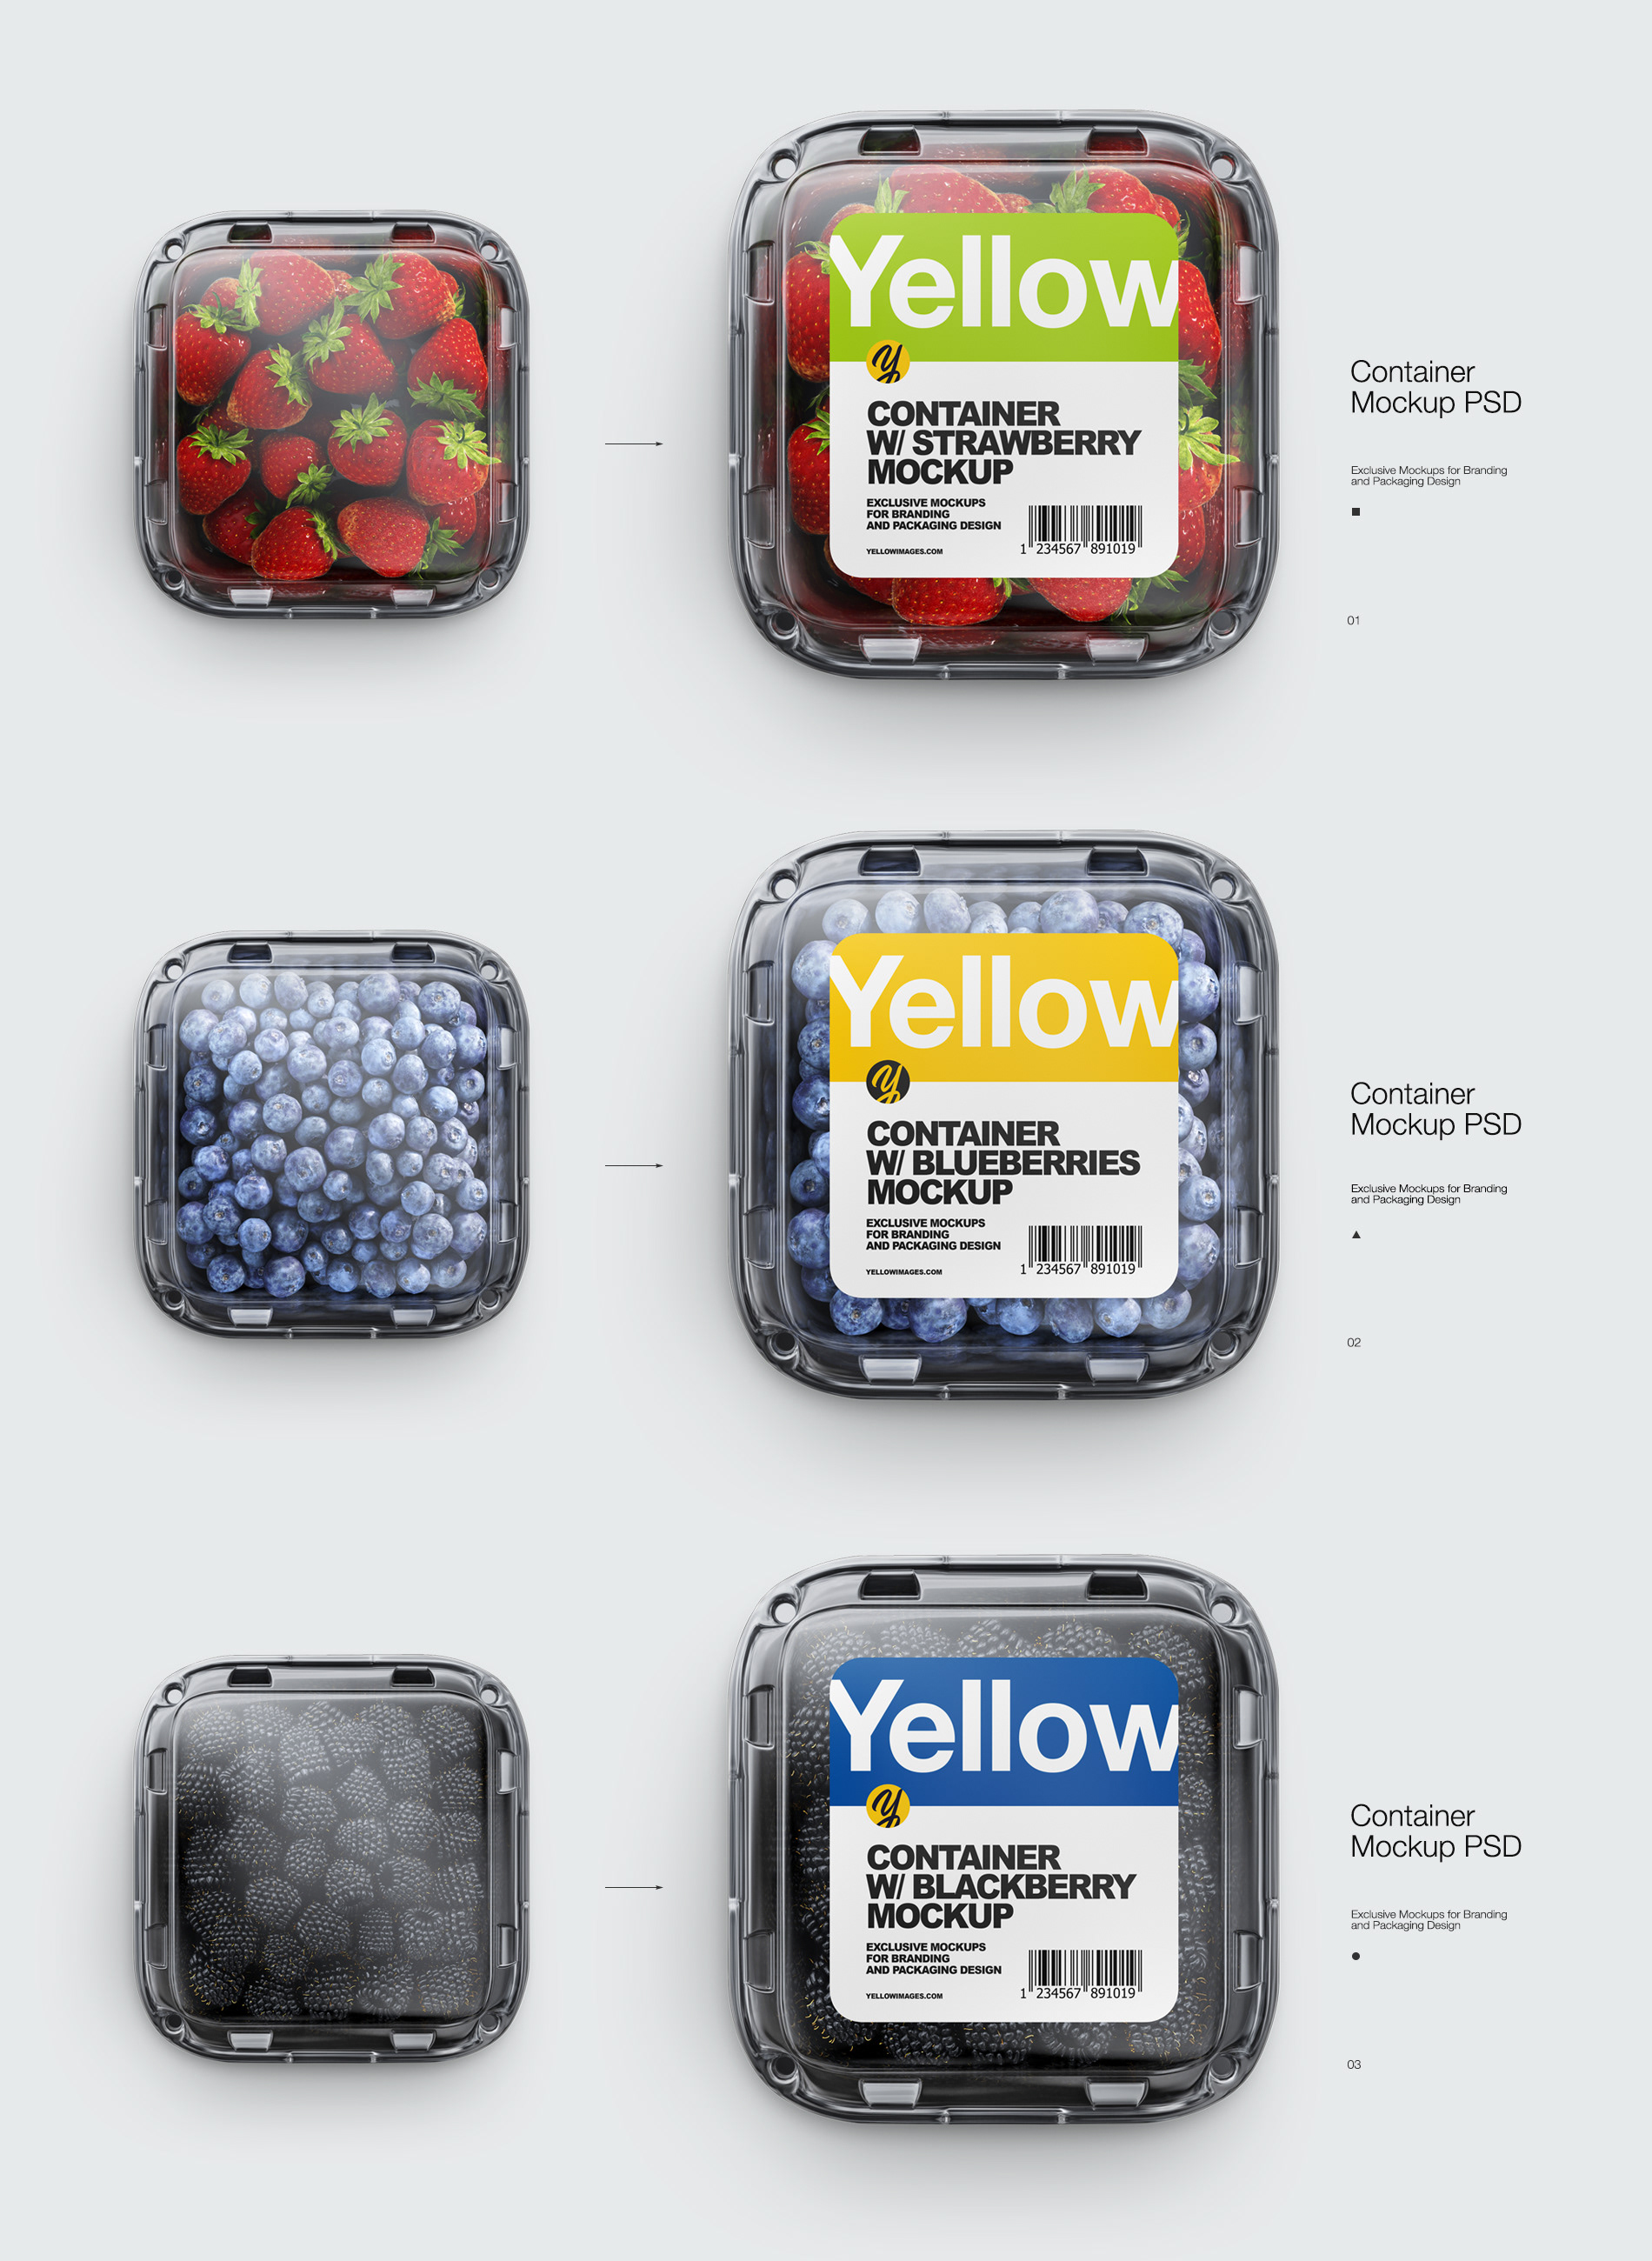 Containers Mockups Psd On Behance